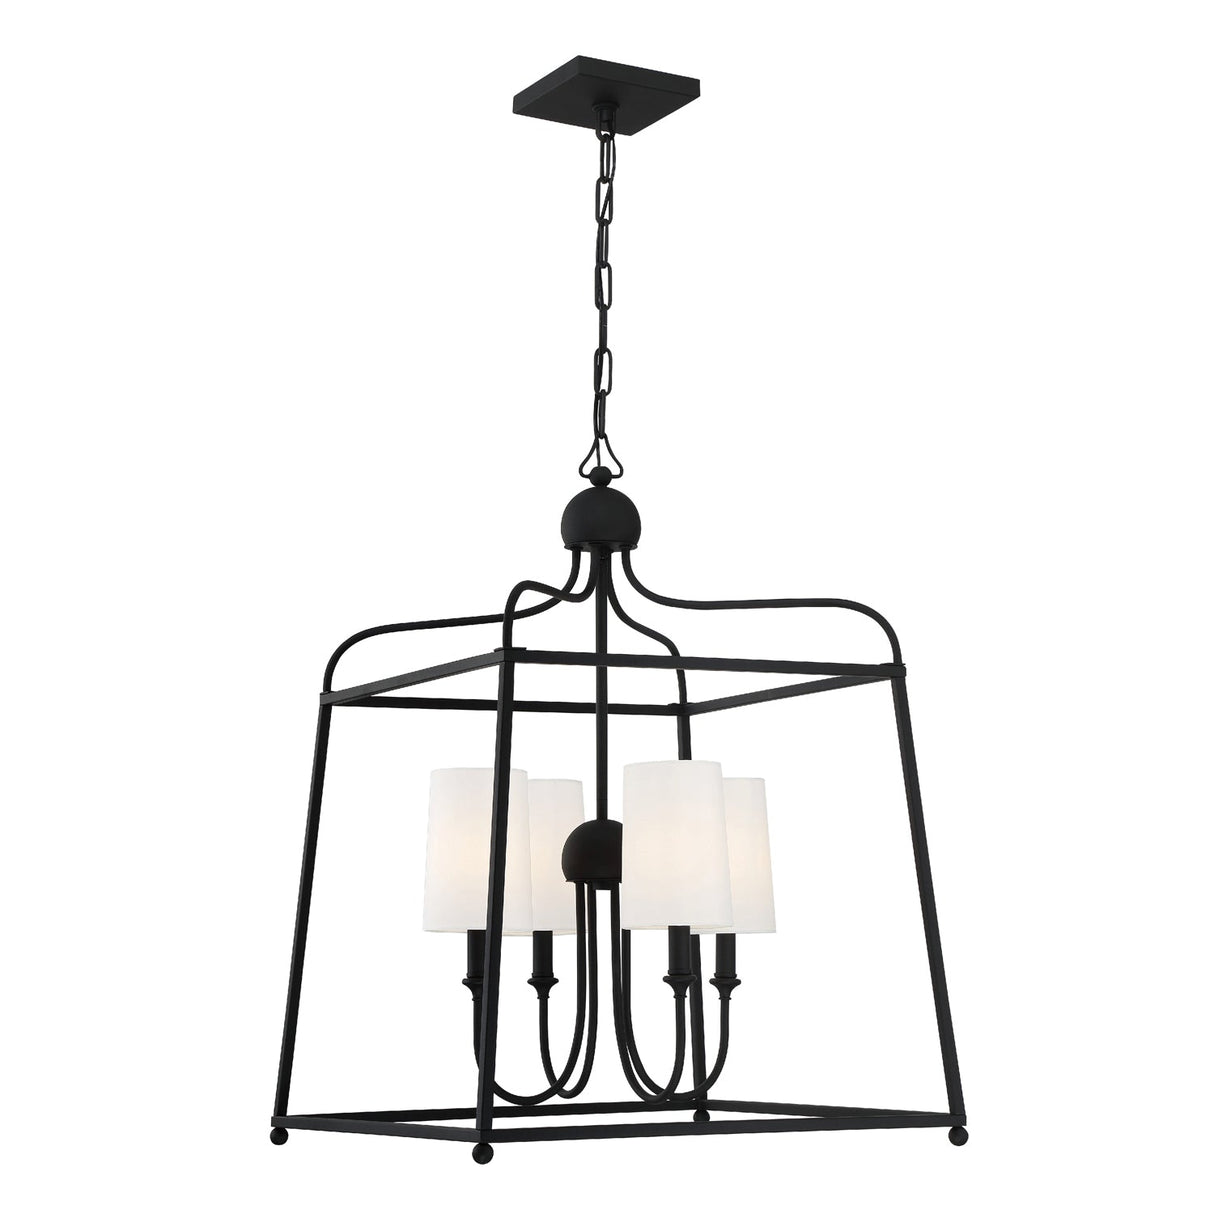 Libby Langdon for Crystorama Sylvan 4 Light Black Forged Chandelier 2244-BF